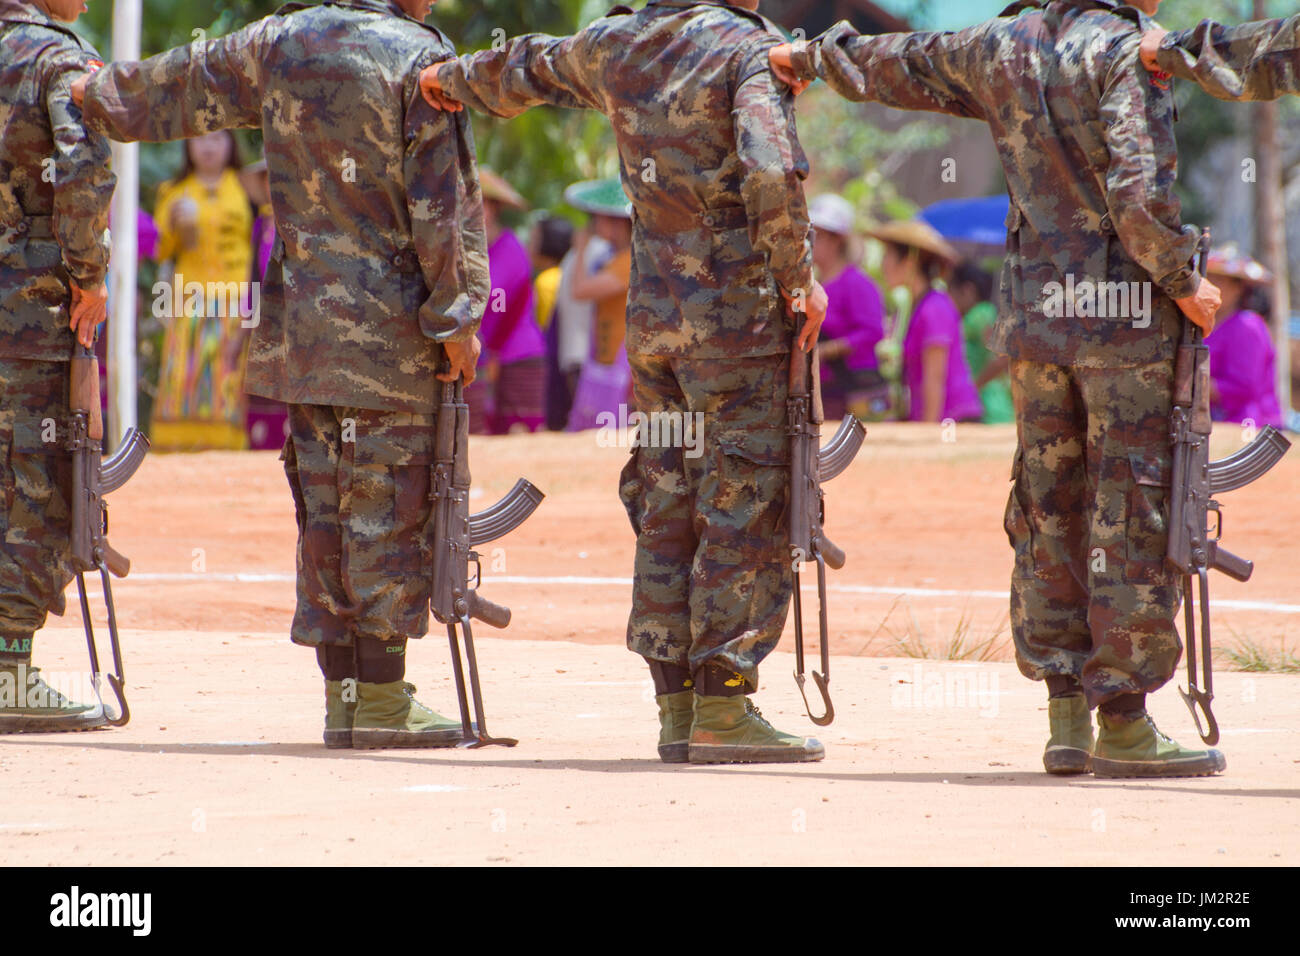 Loi Kaw Wan, Myanmar - May 21: Unidentified Group Of Soldiers In A Training At Boot Camp On May 21, 2017 In Loi Kaw Wan, Myanmar. Stock Photo